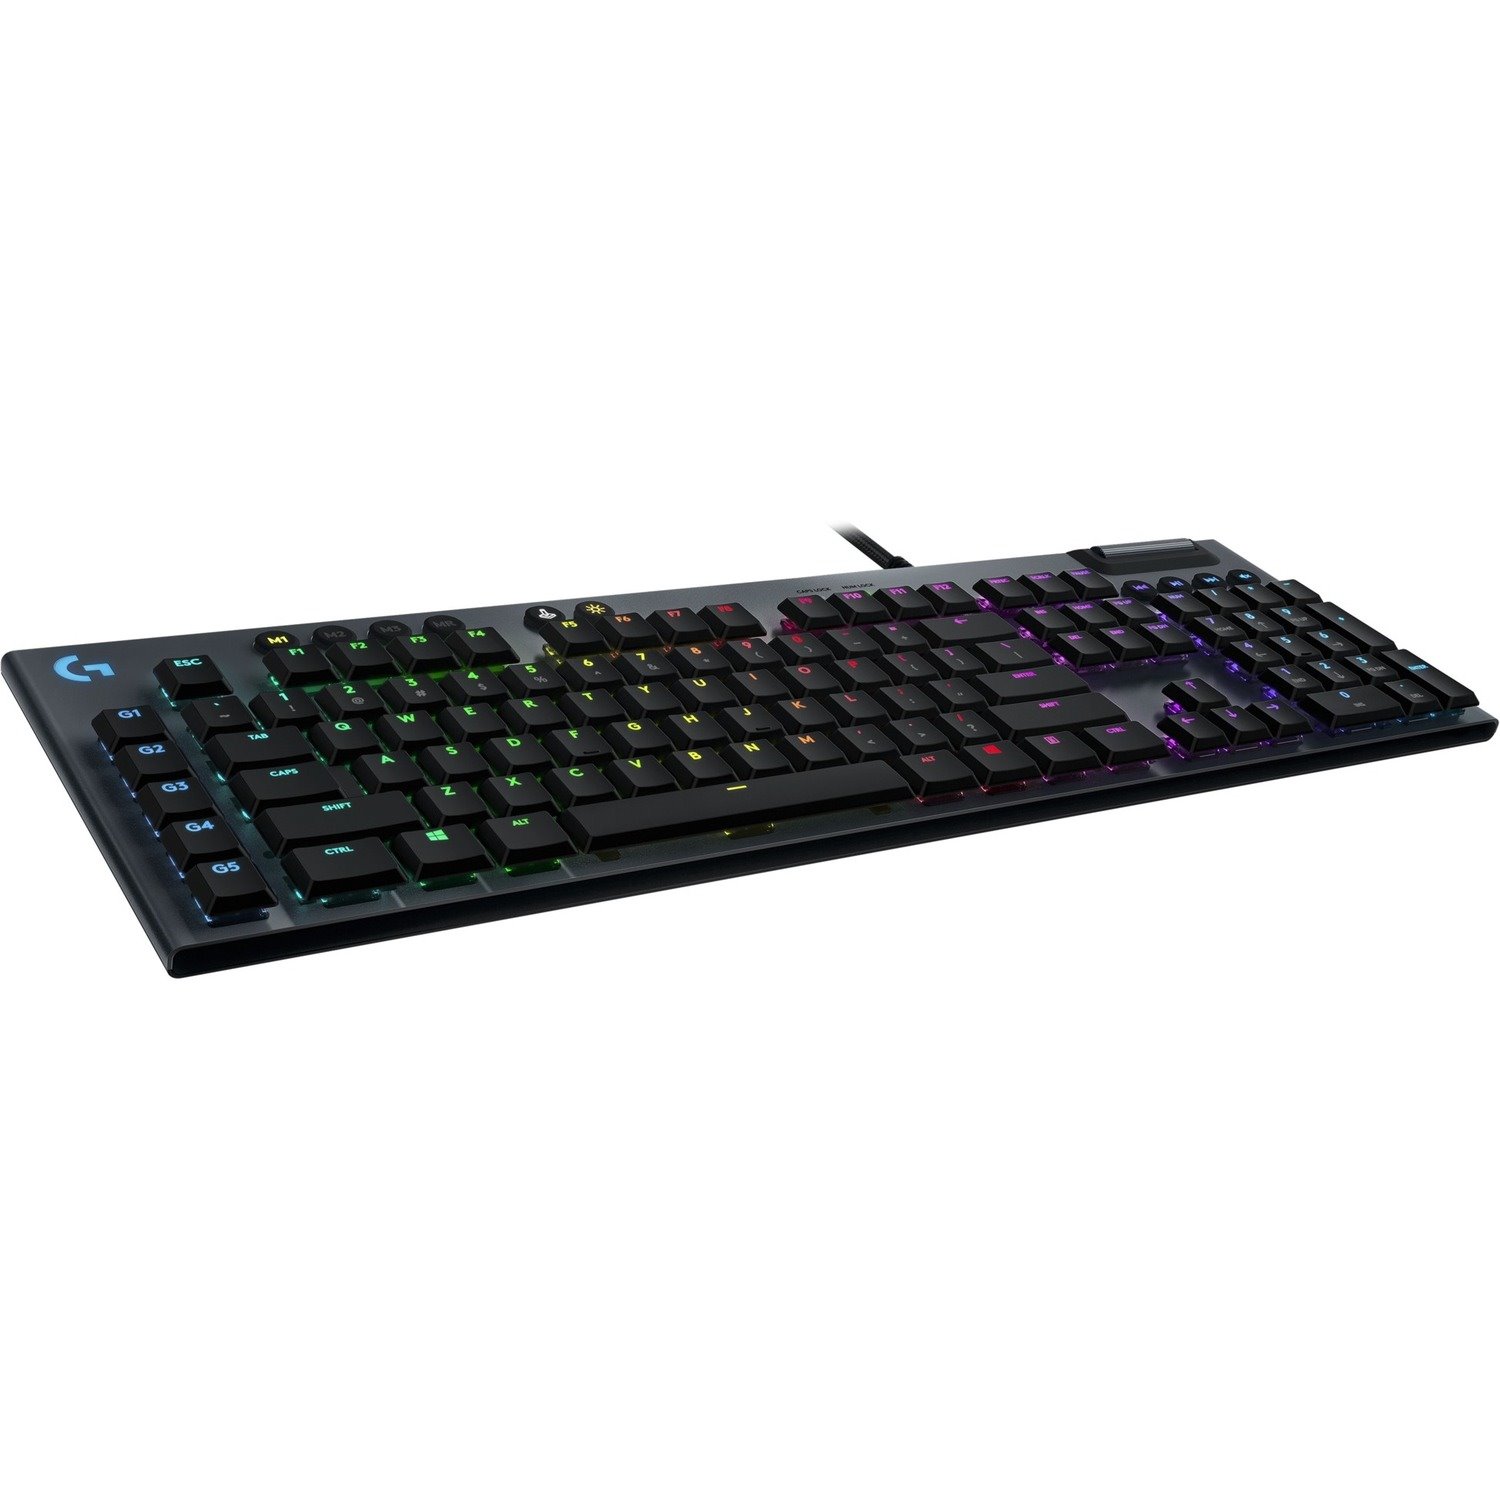 Logitech G815 Gaming Keyboard - Cable Connectivity - USB Interface - French - AZERTY Layout - Black